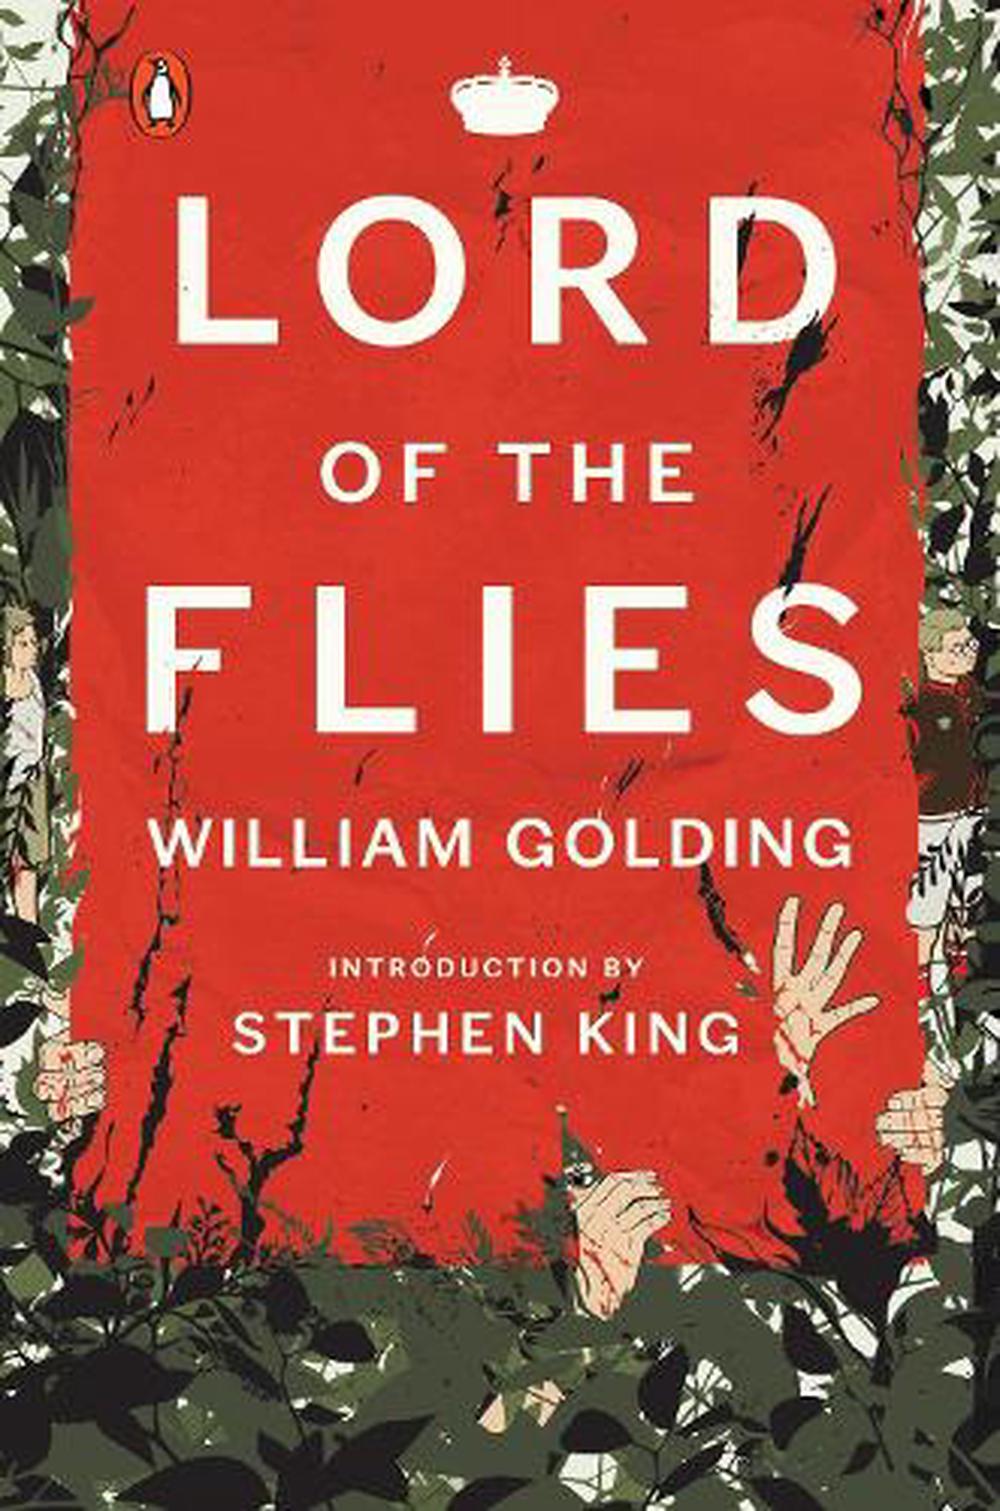 lord of the flies by william golding essay